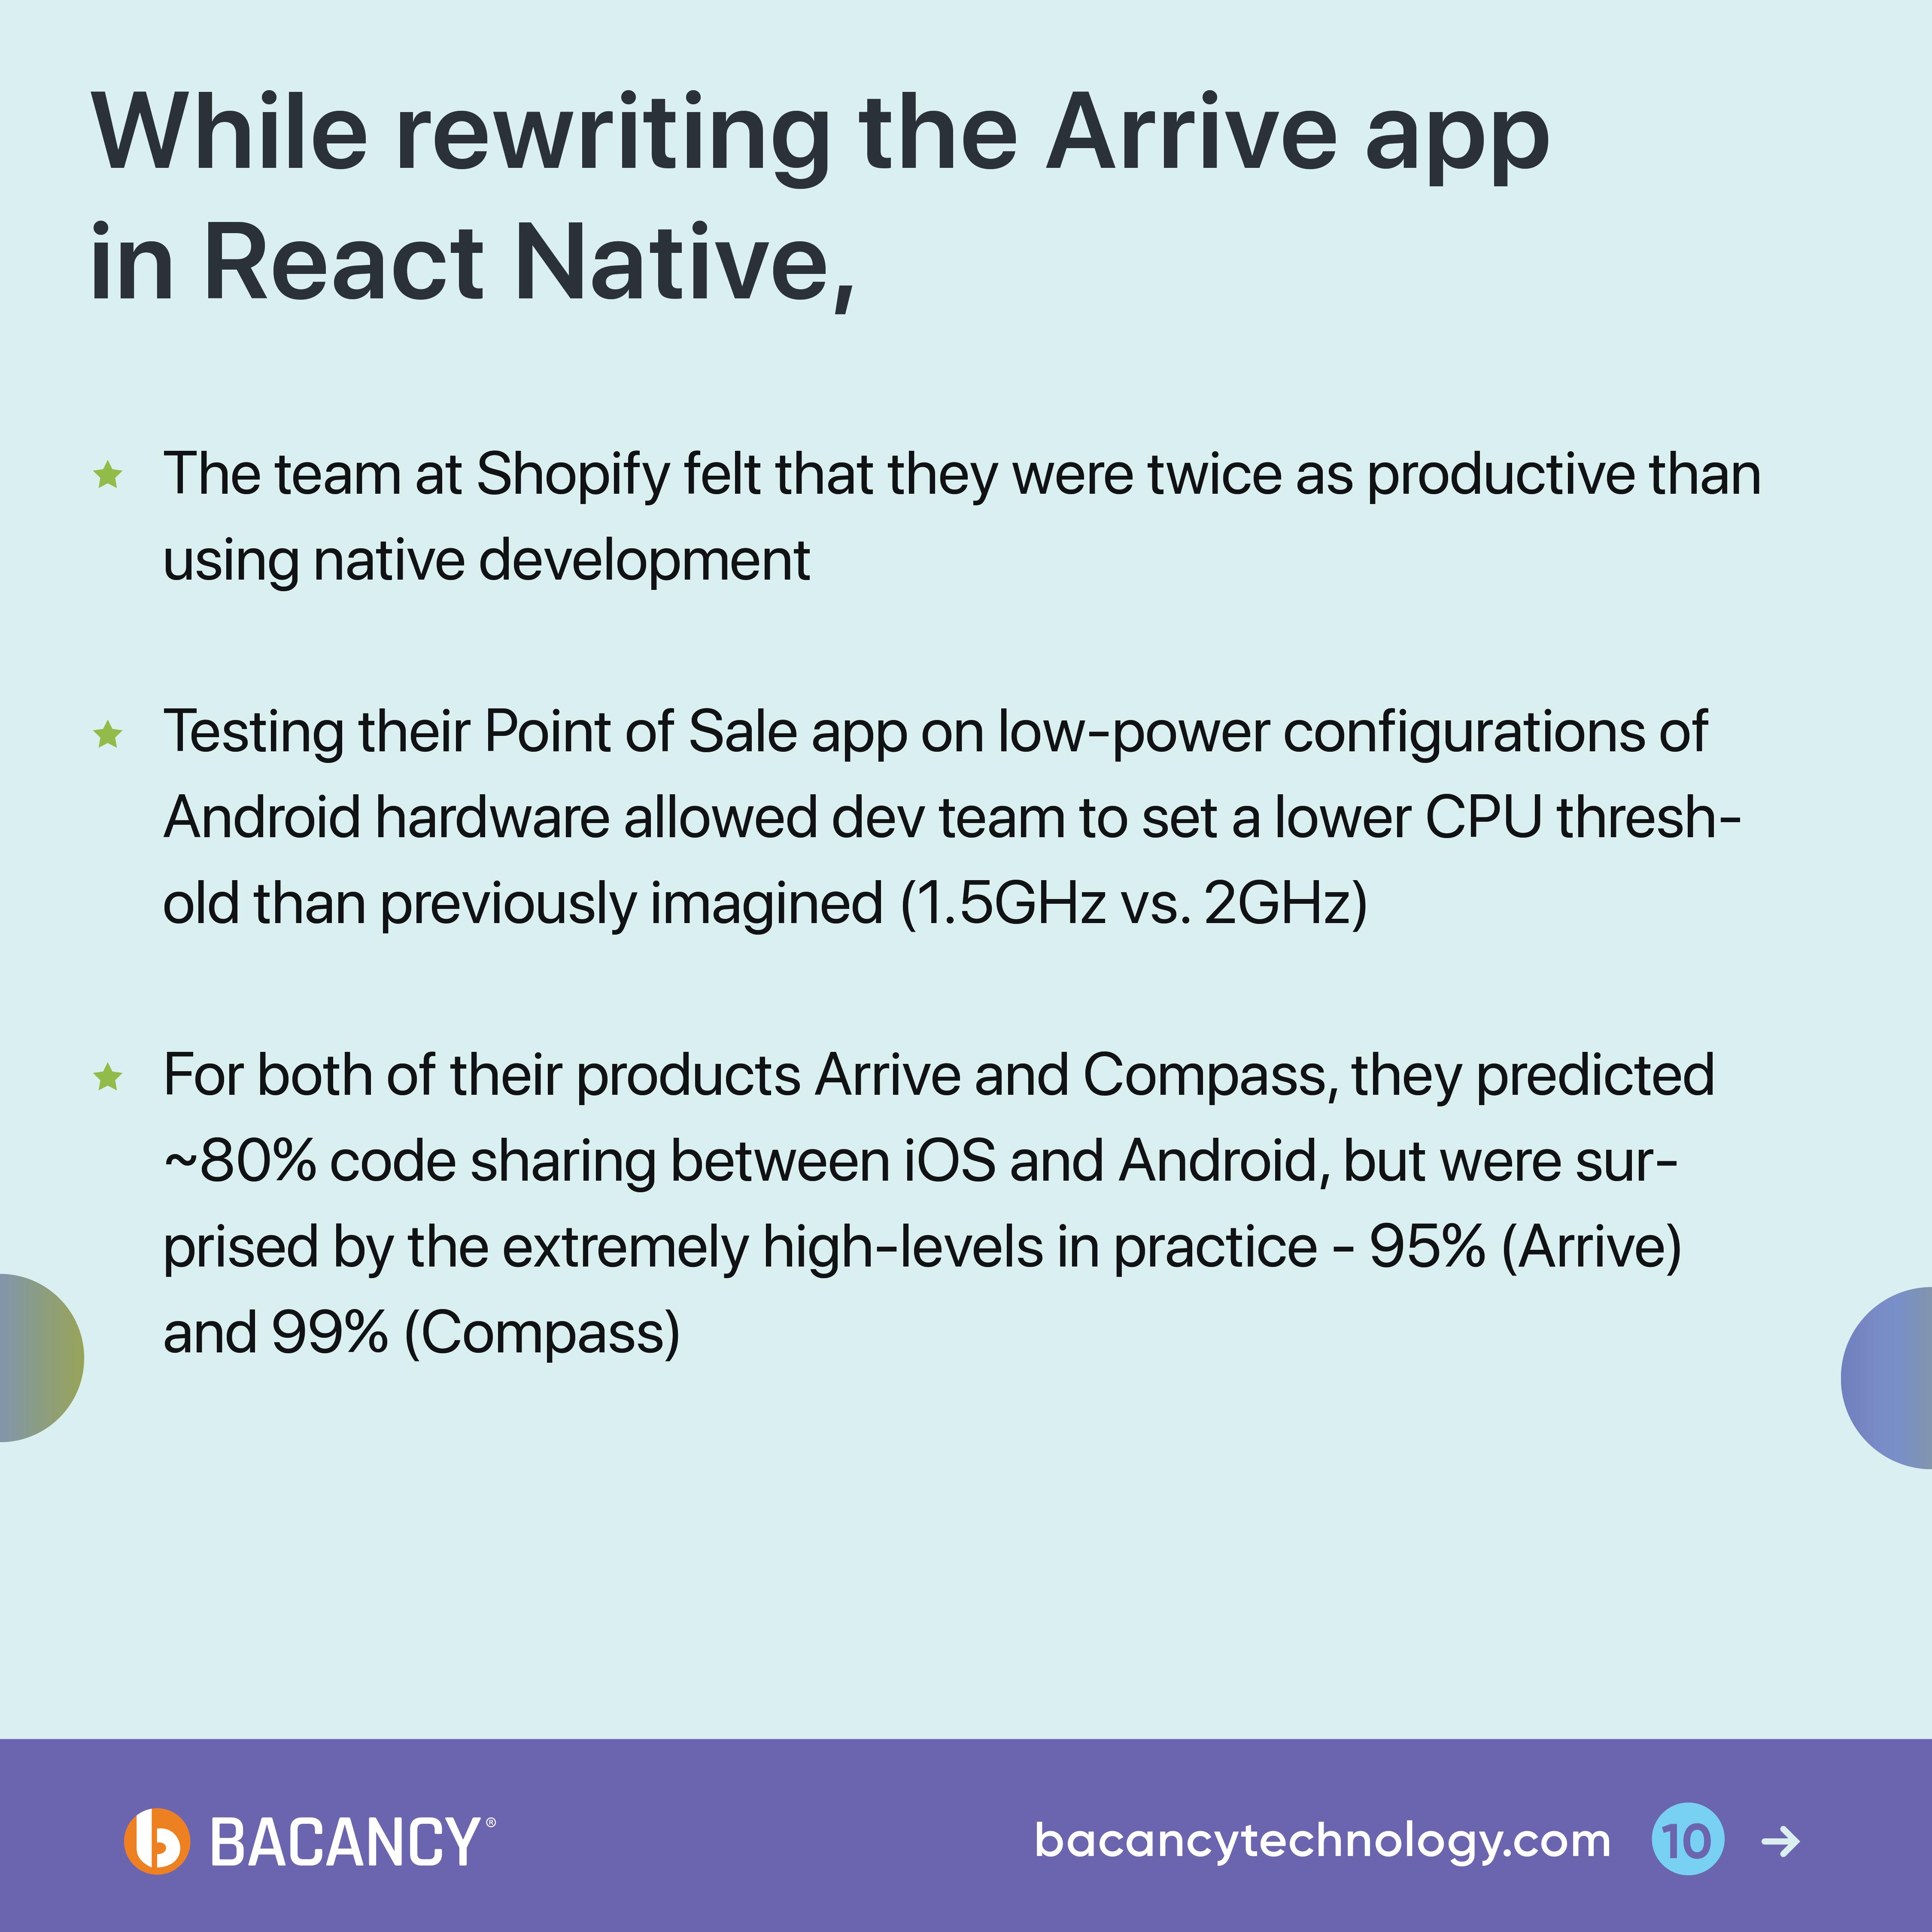 How React Native bet became the Future for Mobile apps at Shopify